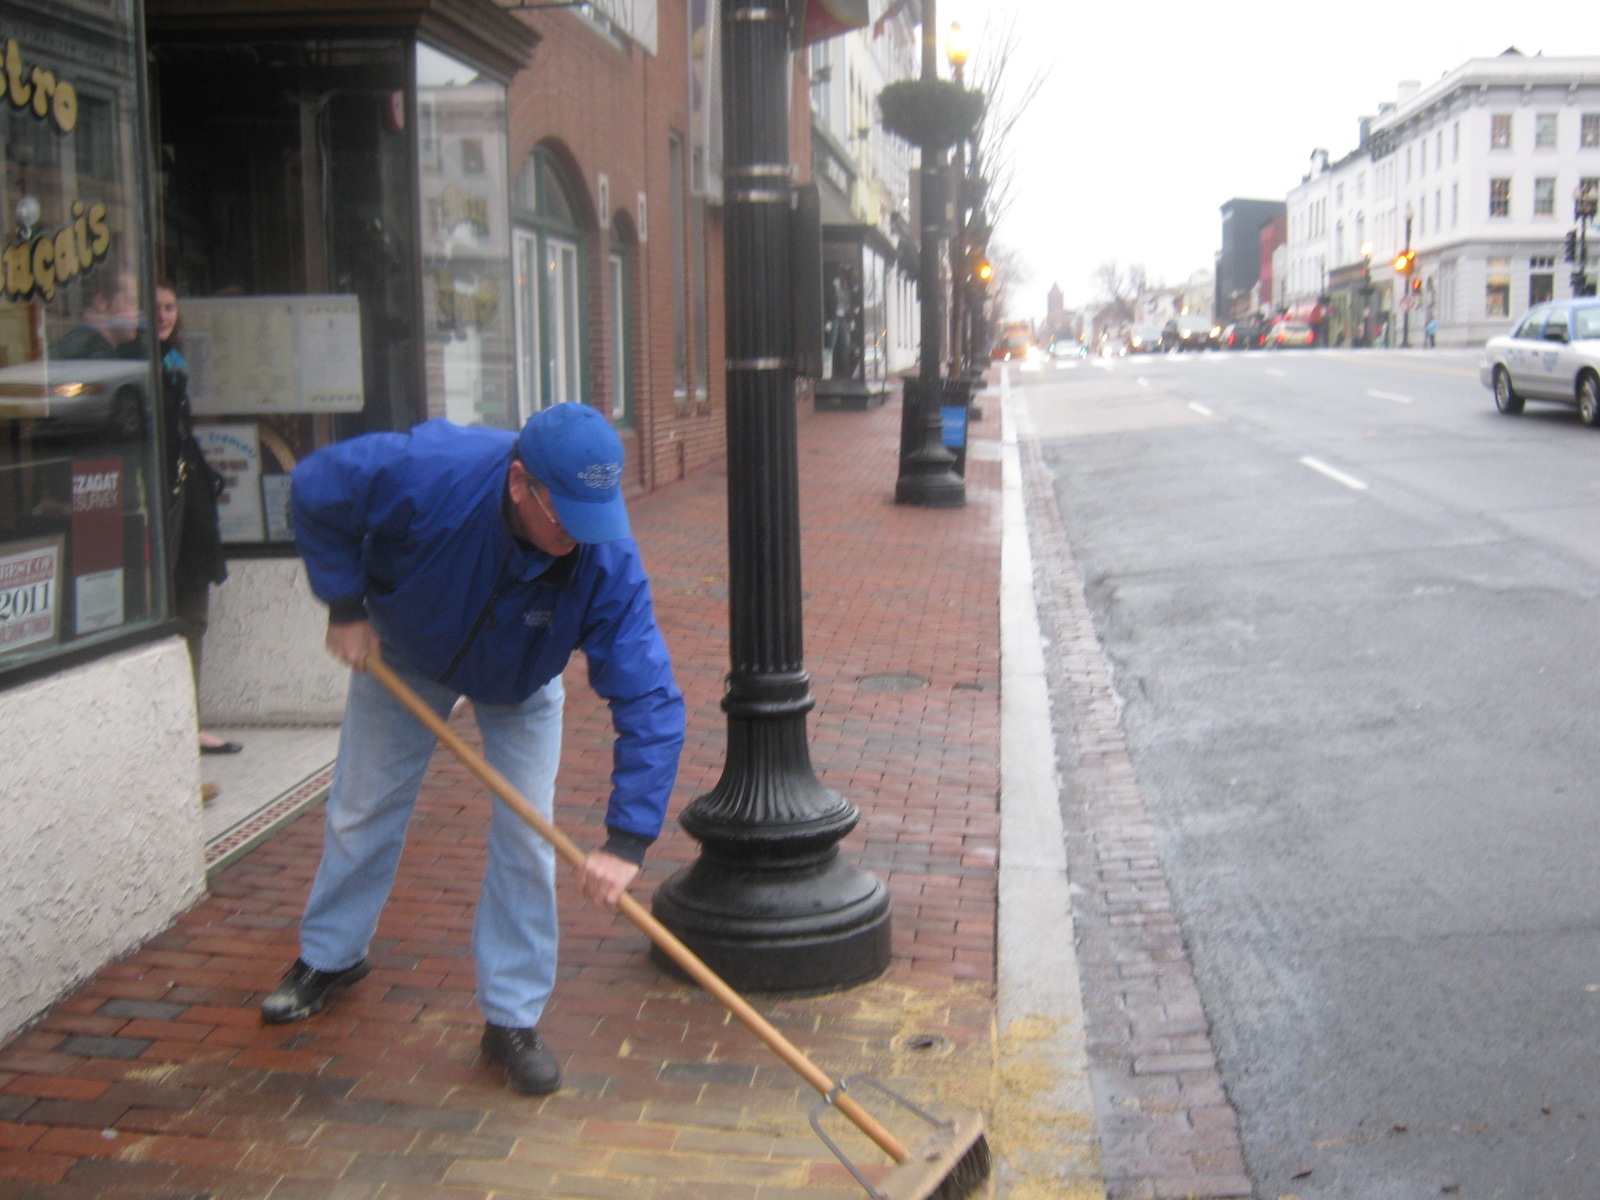 Tending to Georgetown — one brick at a time